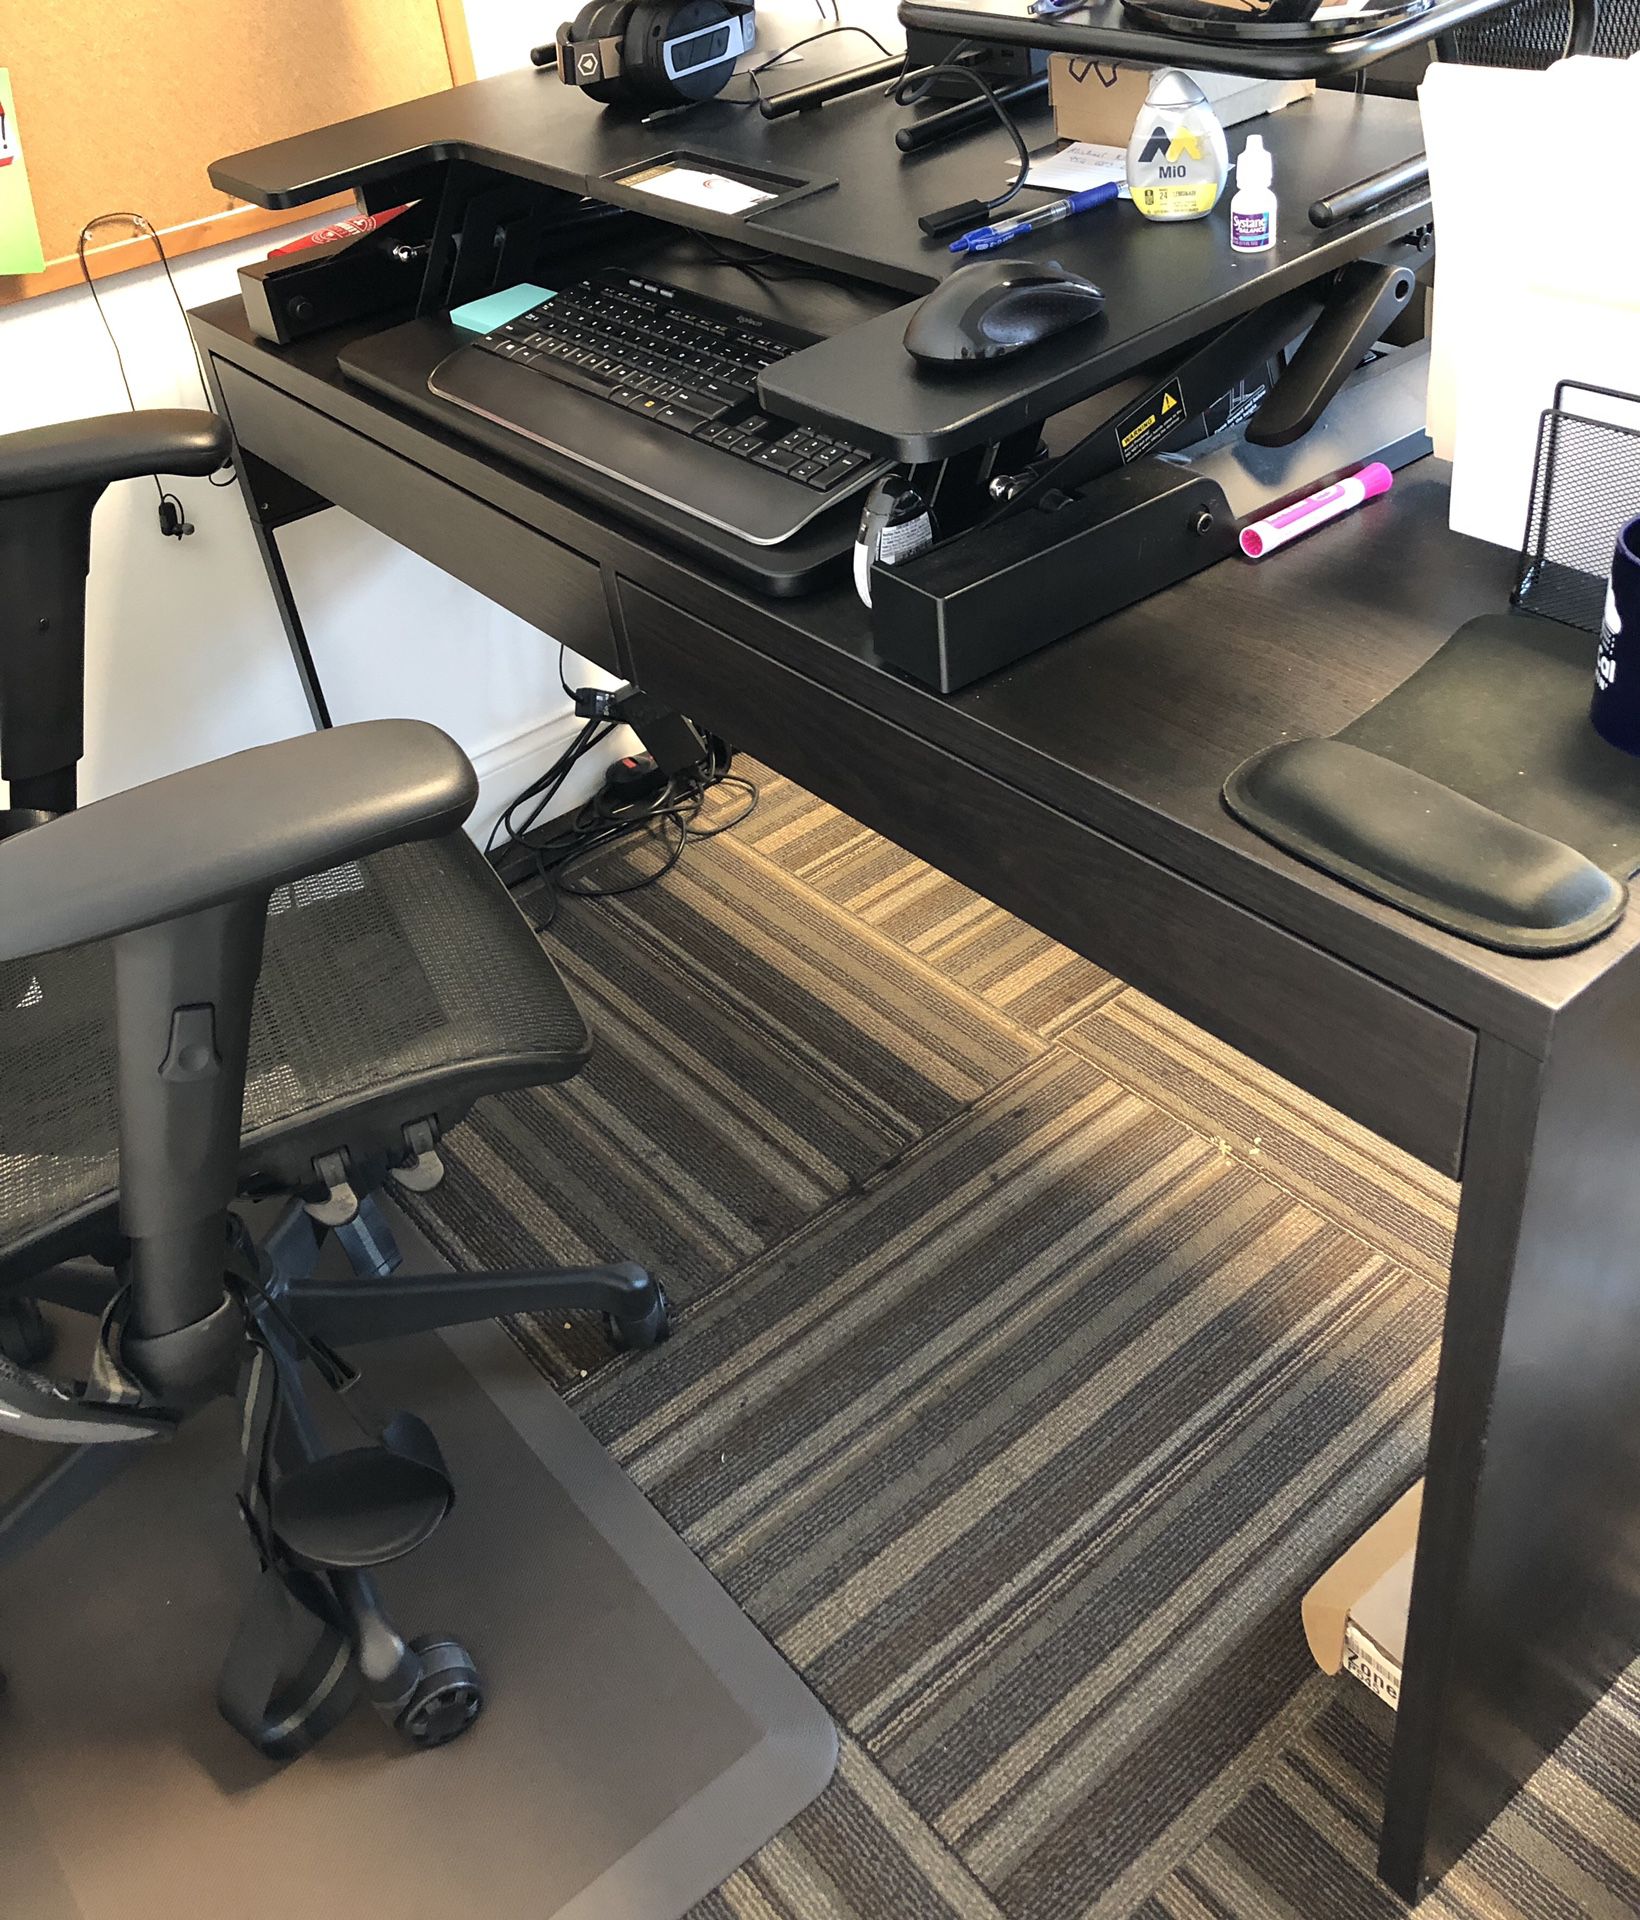 Micke Ikea desk + chair for additional $30